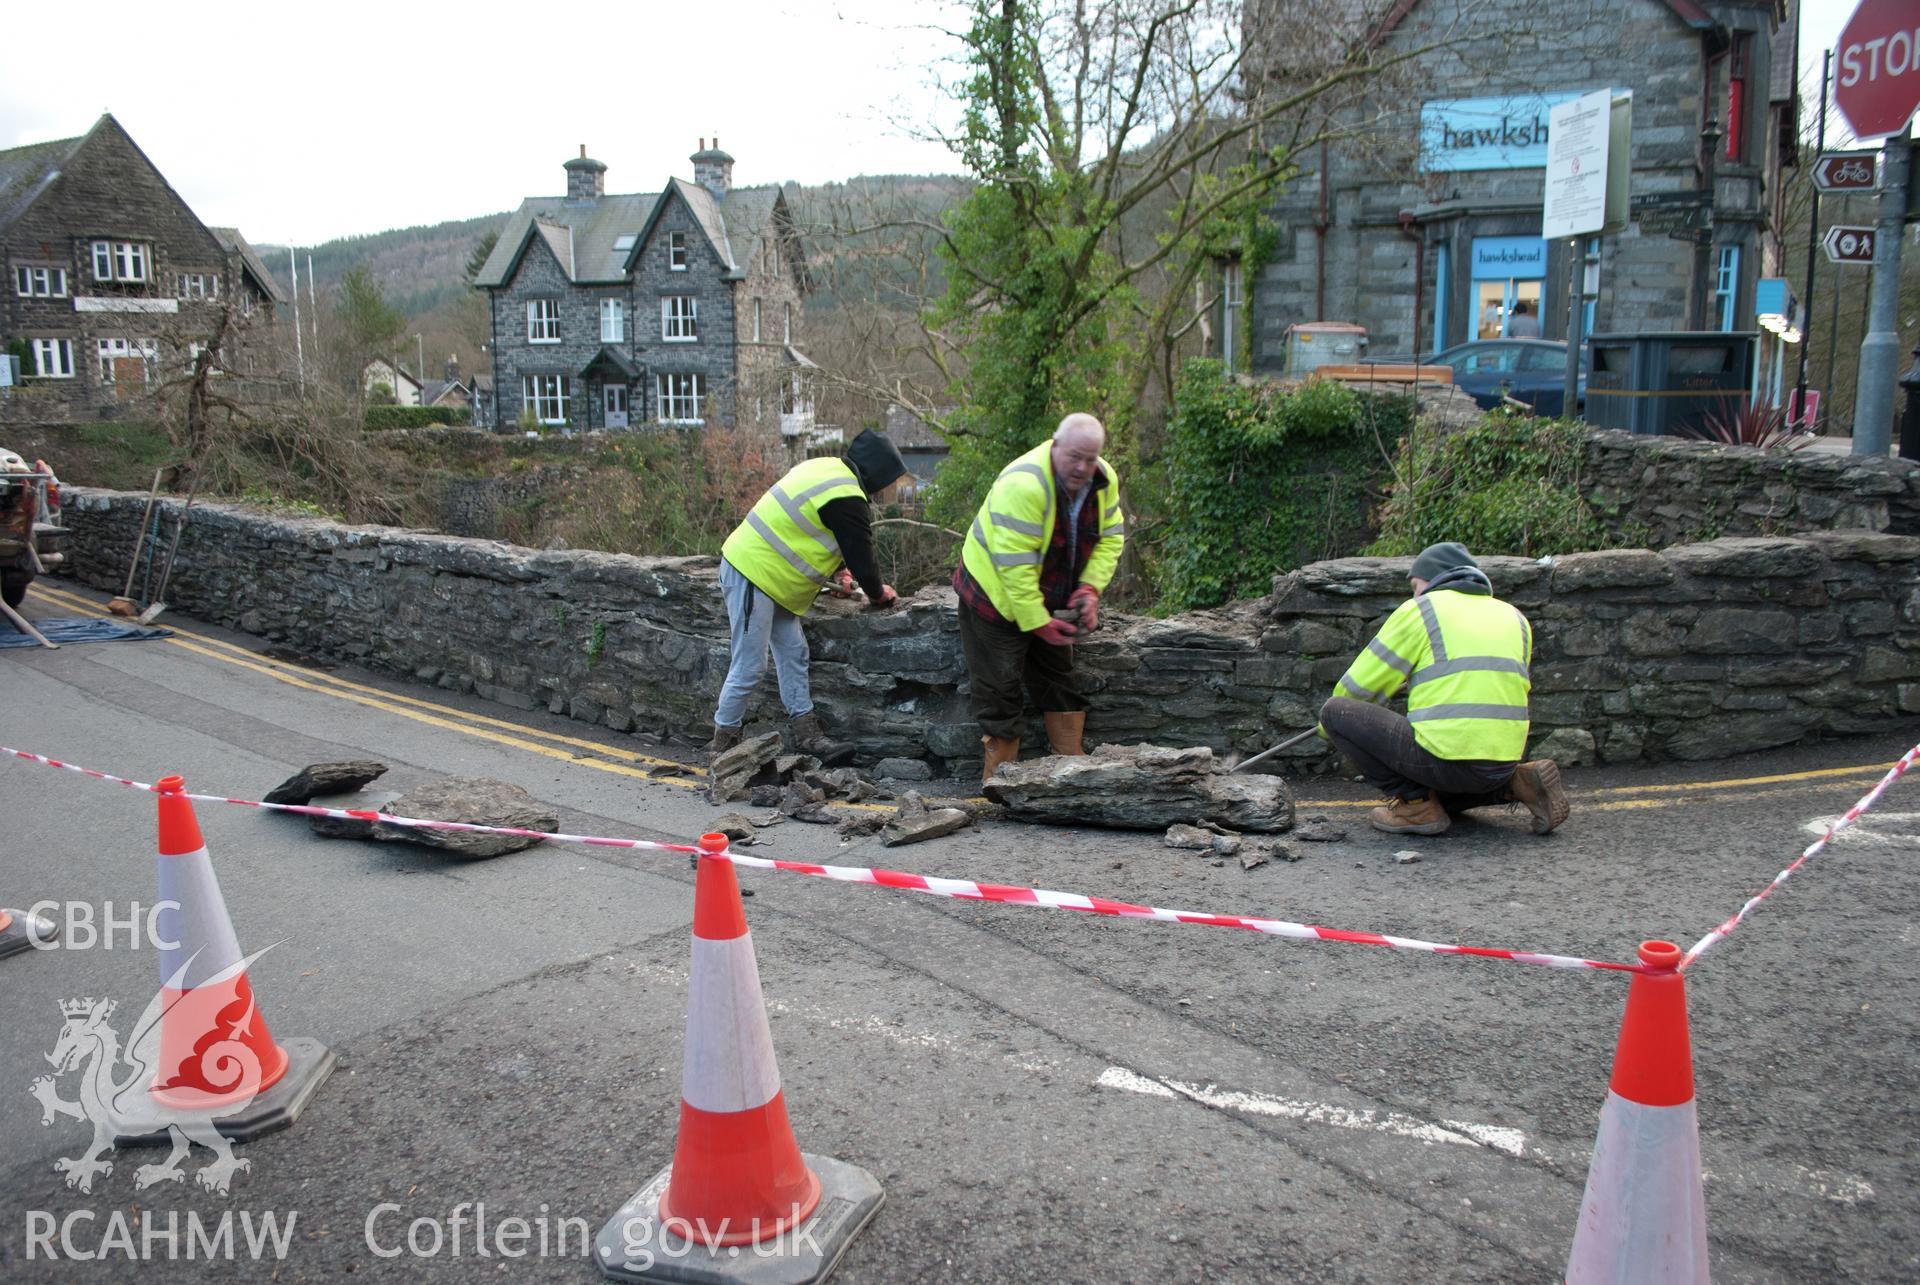 Action shot from the west showing demolition work (by hand) taking place at the southeast corner of the parapet. Digital photograph taken for Archaeological Watching Brief at Pont y Pair, Betws y Coed, 2019. Gwynedd Archaeological Trust Project no. G2587.